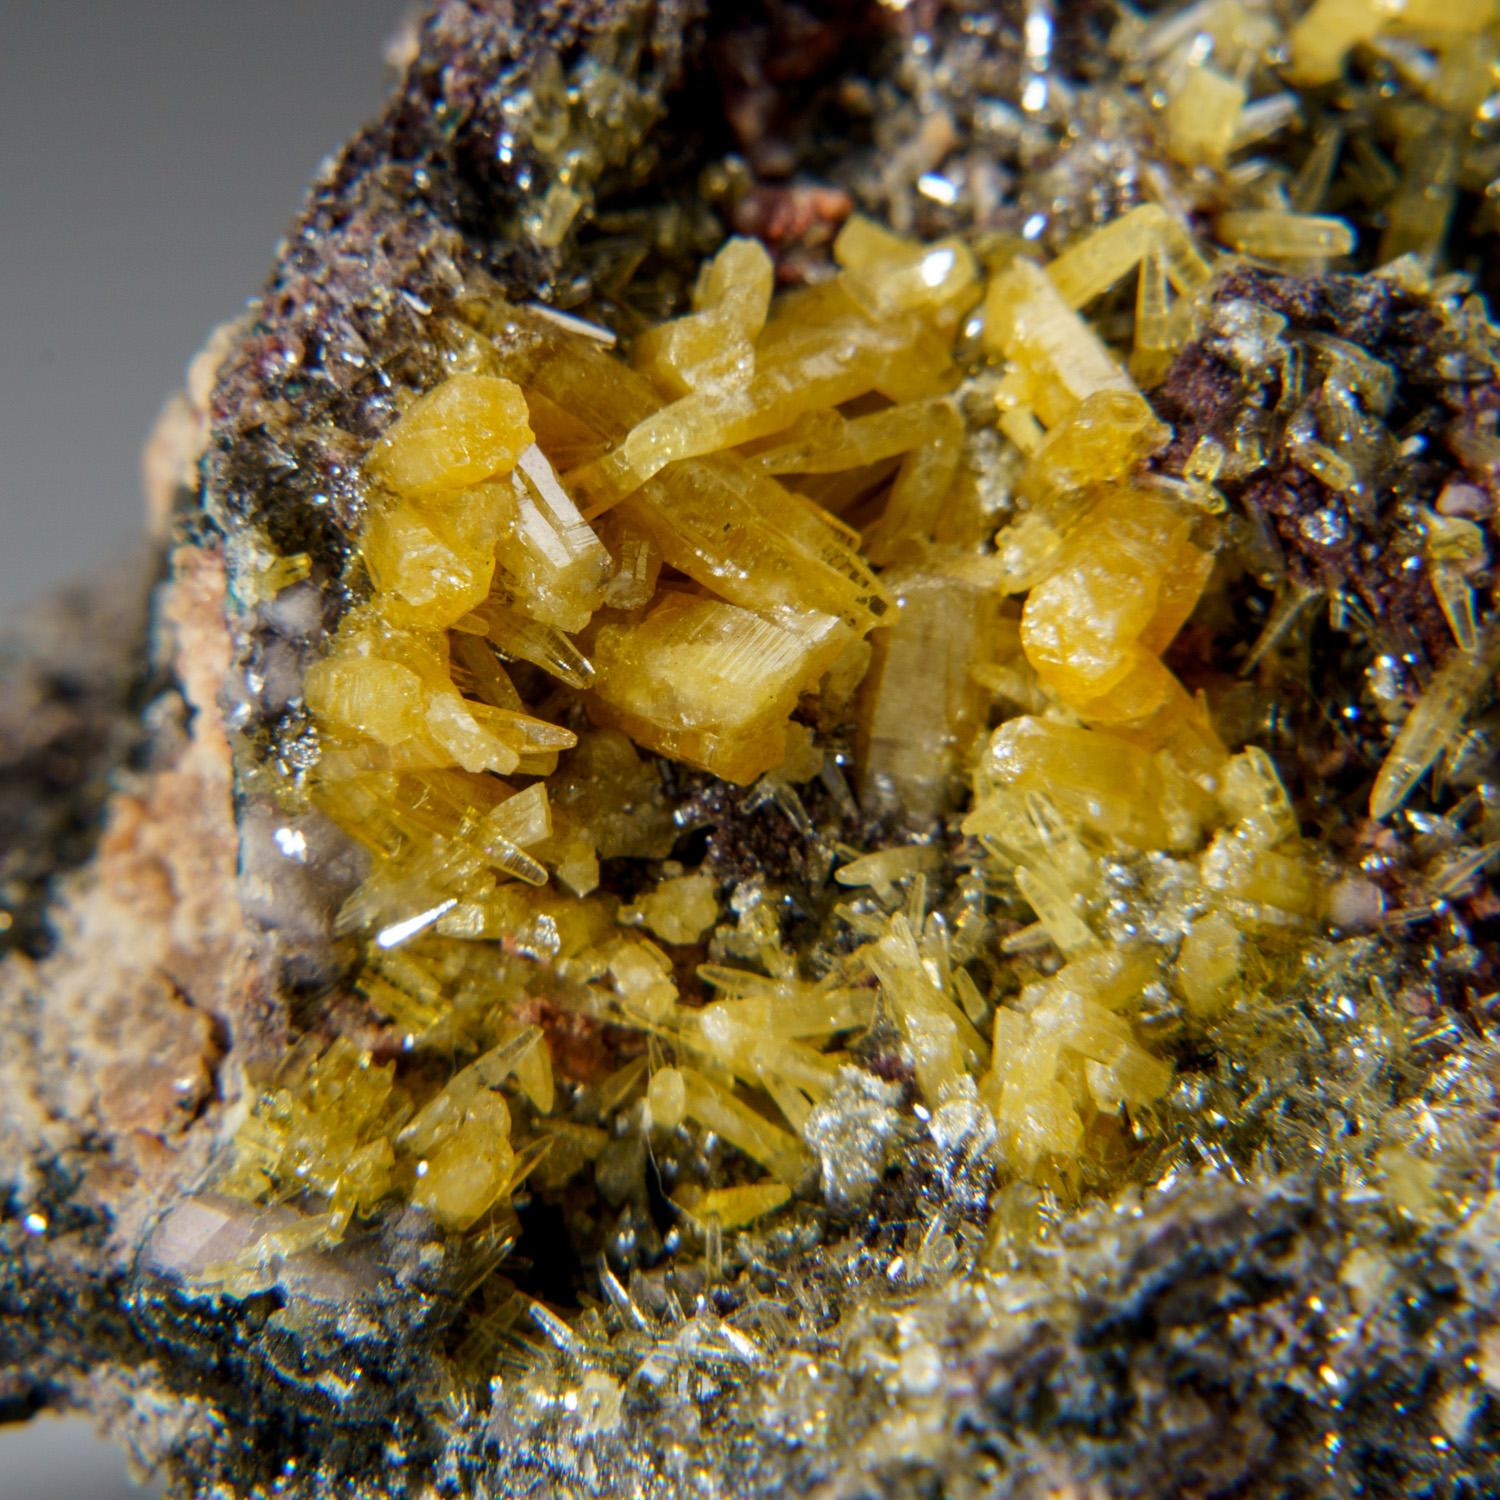 From Tsumeb Mine, Otavi-Bergland District, Oshikoto, Namibia

Rich cluster of many intersecting yellow mimetite crystals. Very lustrous, good color. The crystals are elongated and completely intact and undamaged with superb color and